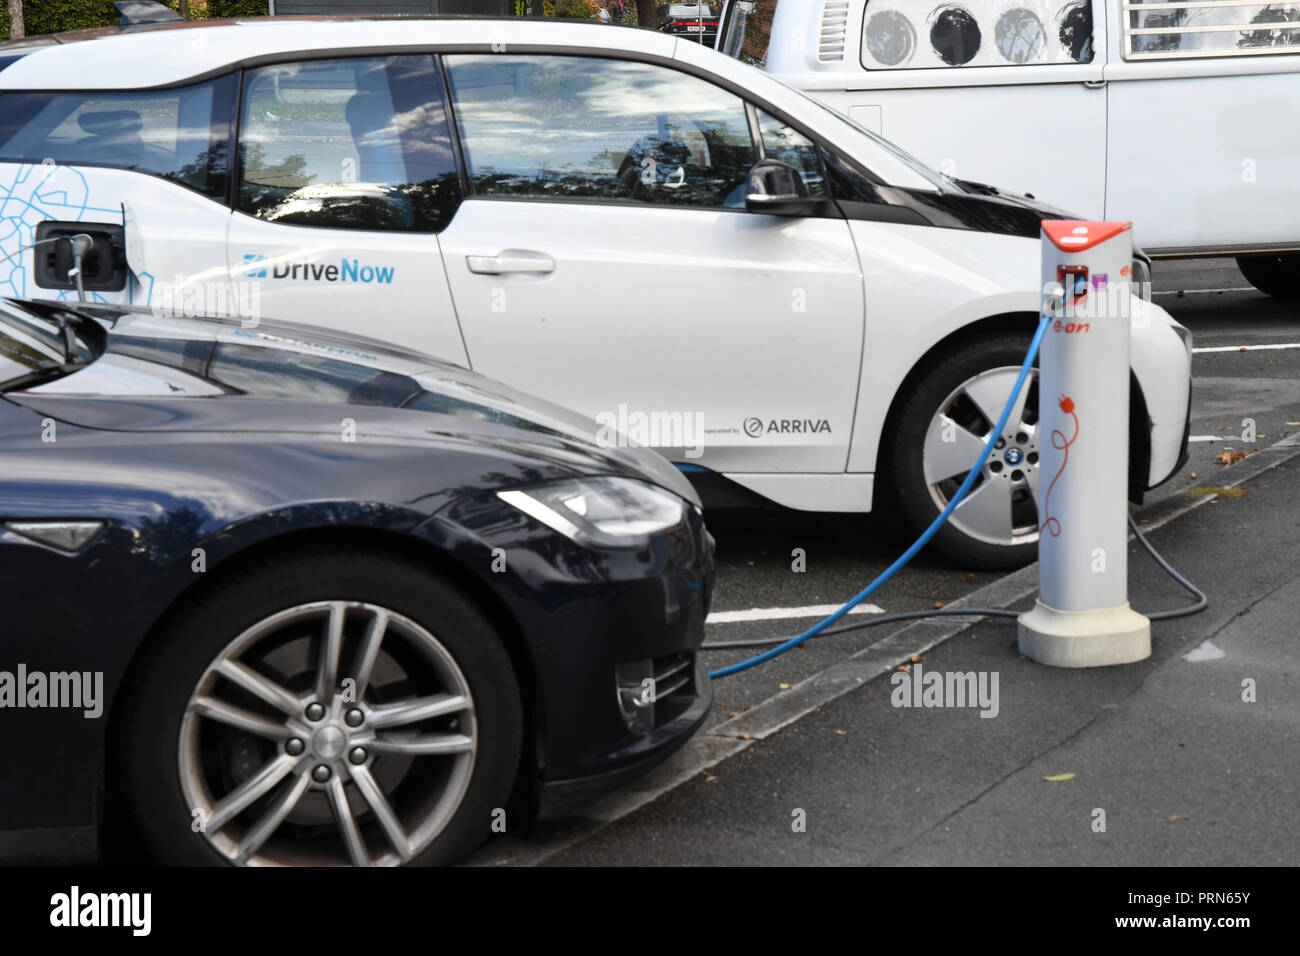 Eelctric Charge Point High Resolution Stock Photography and Images - Alamy